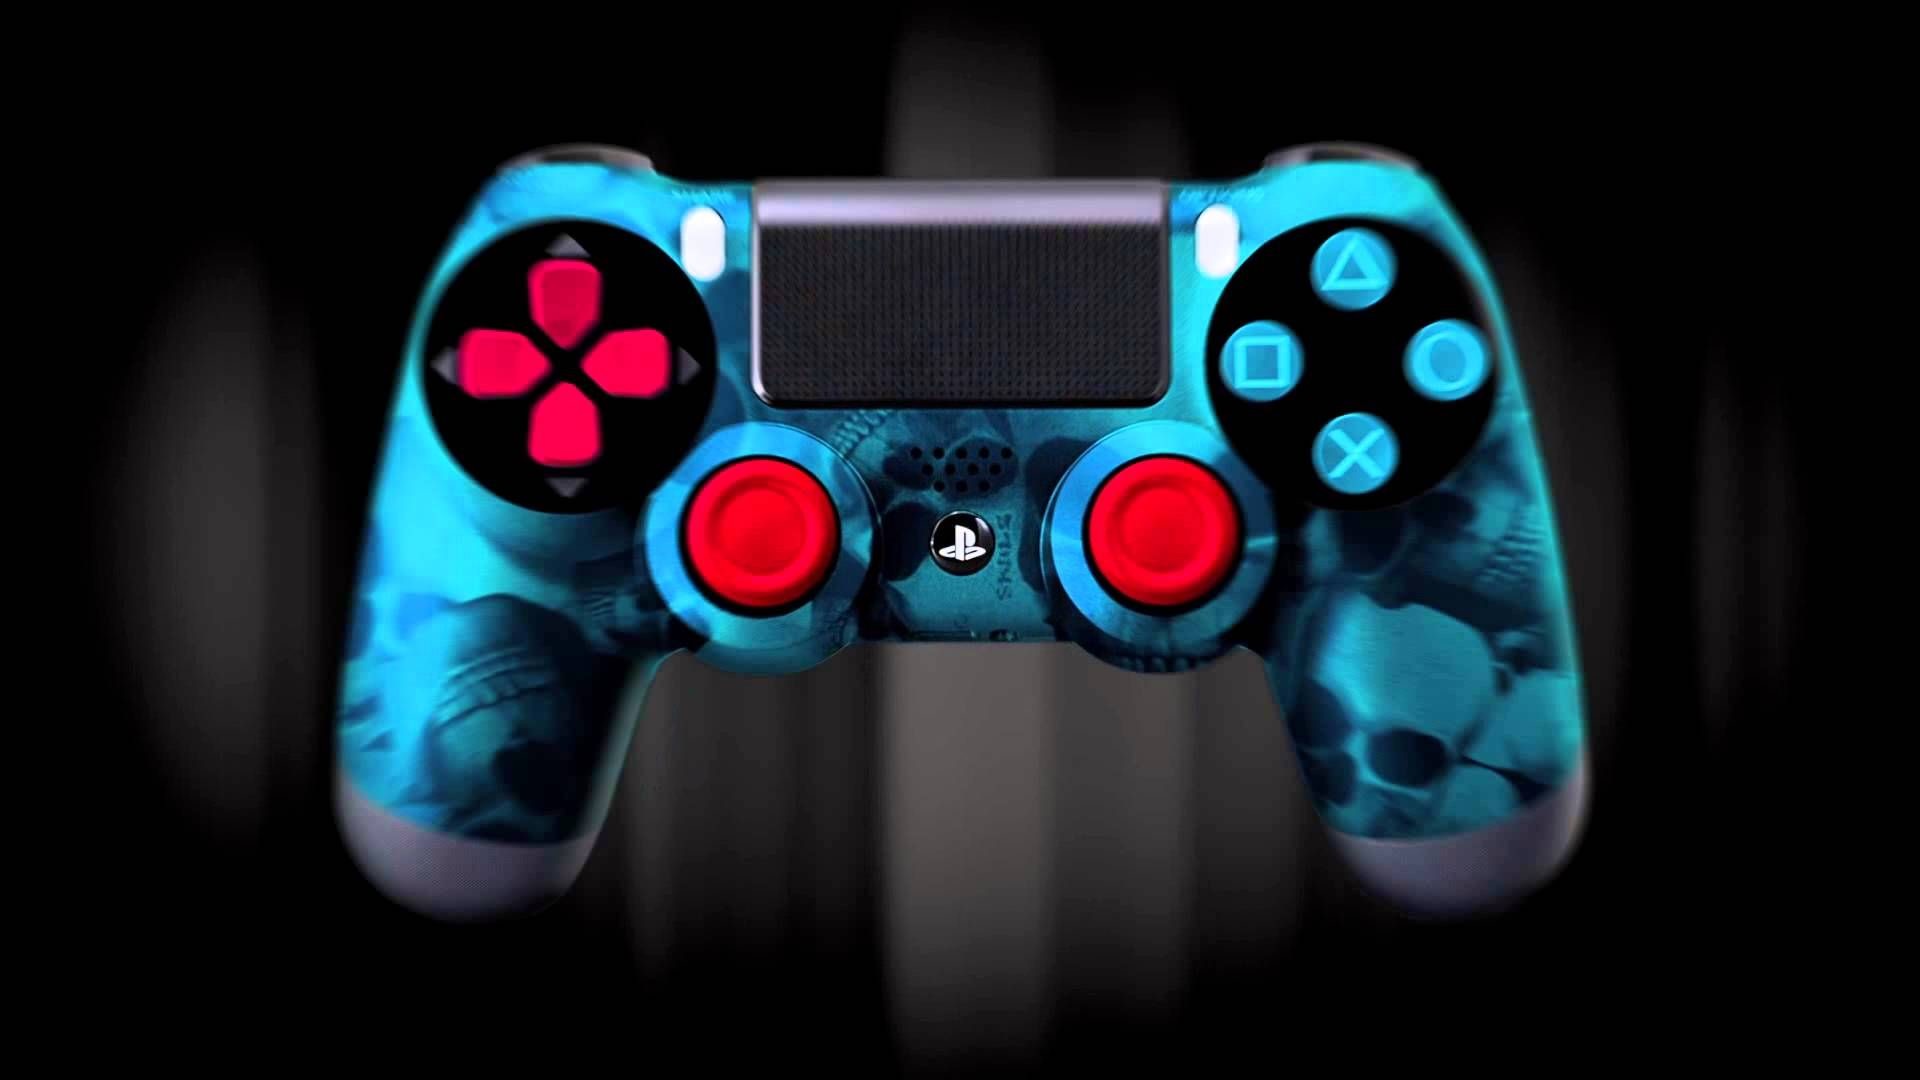 ps4 wallpaper,game controller,home game console accessory,joystick,video game accessory,playstation accessory